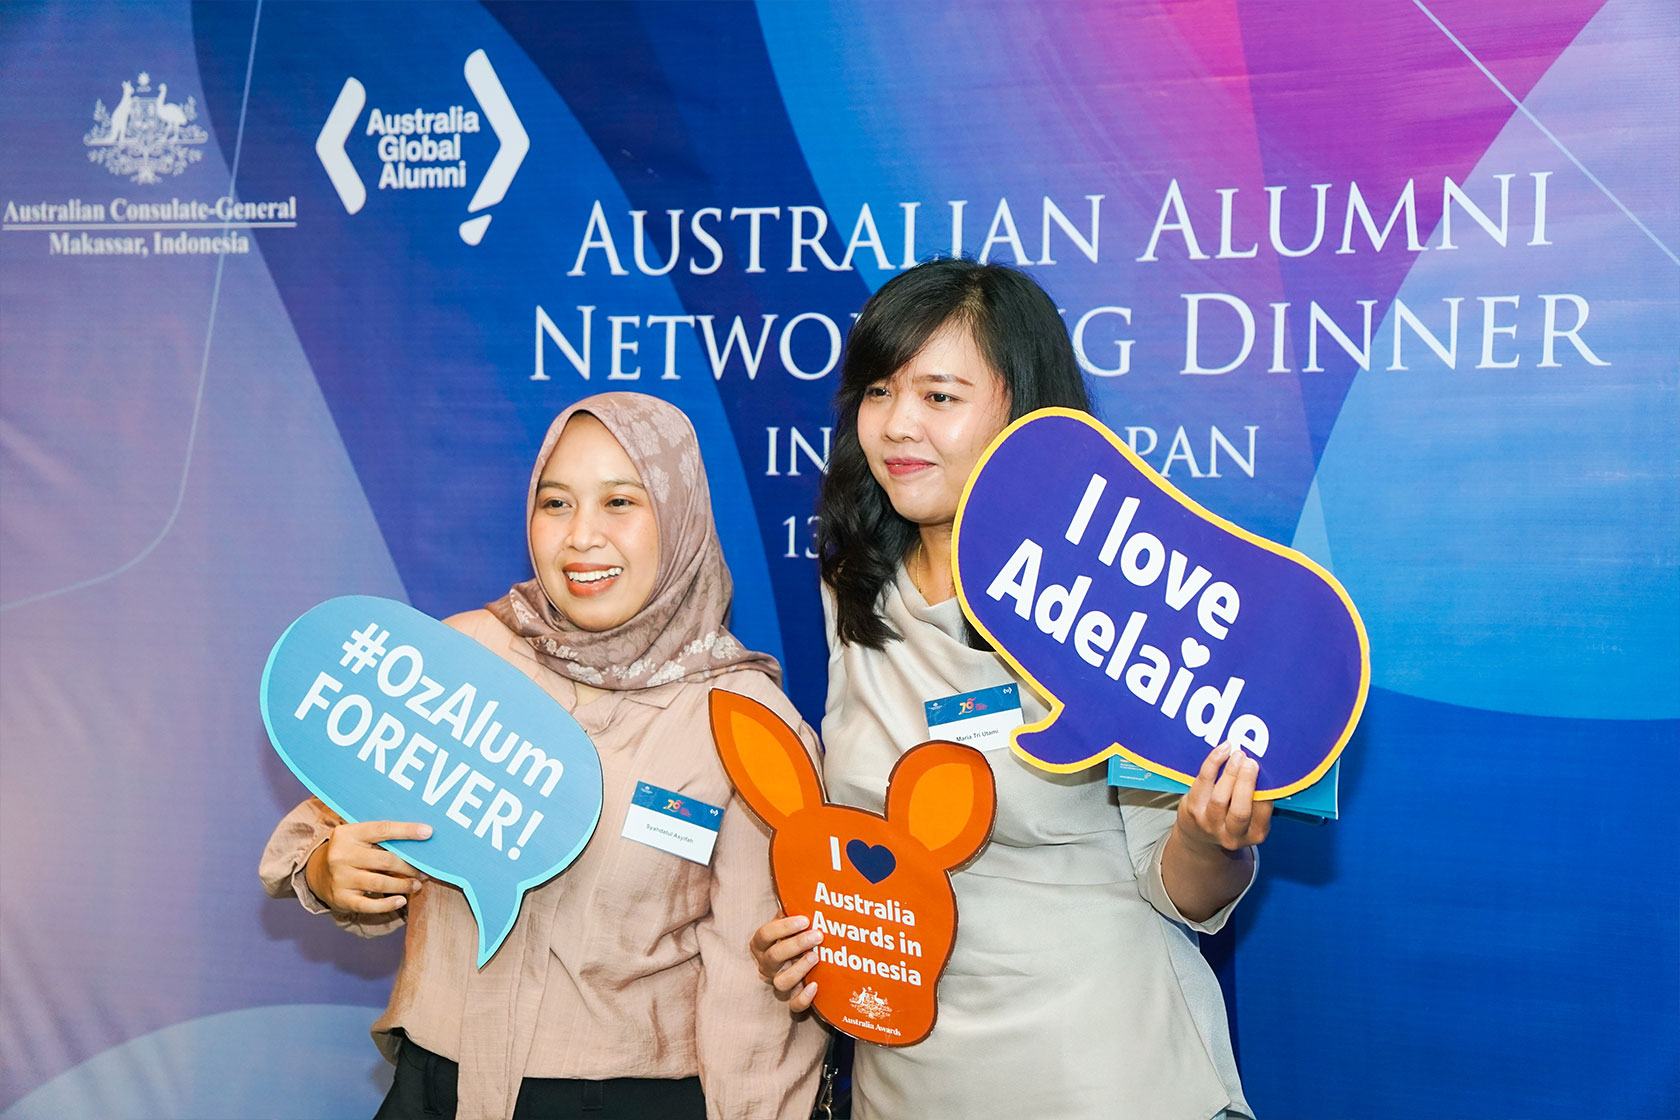 Alumni capture heartwarming moments from the Networking Dinner through our photo booth, preserving the memories.